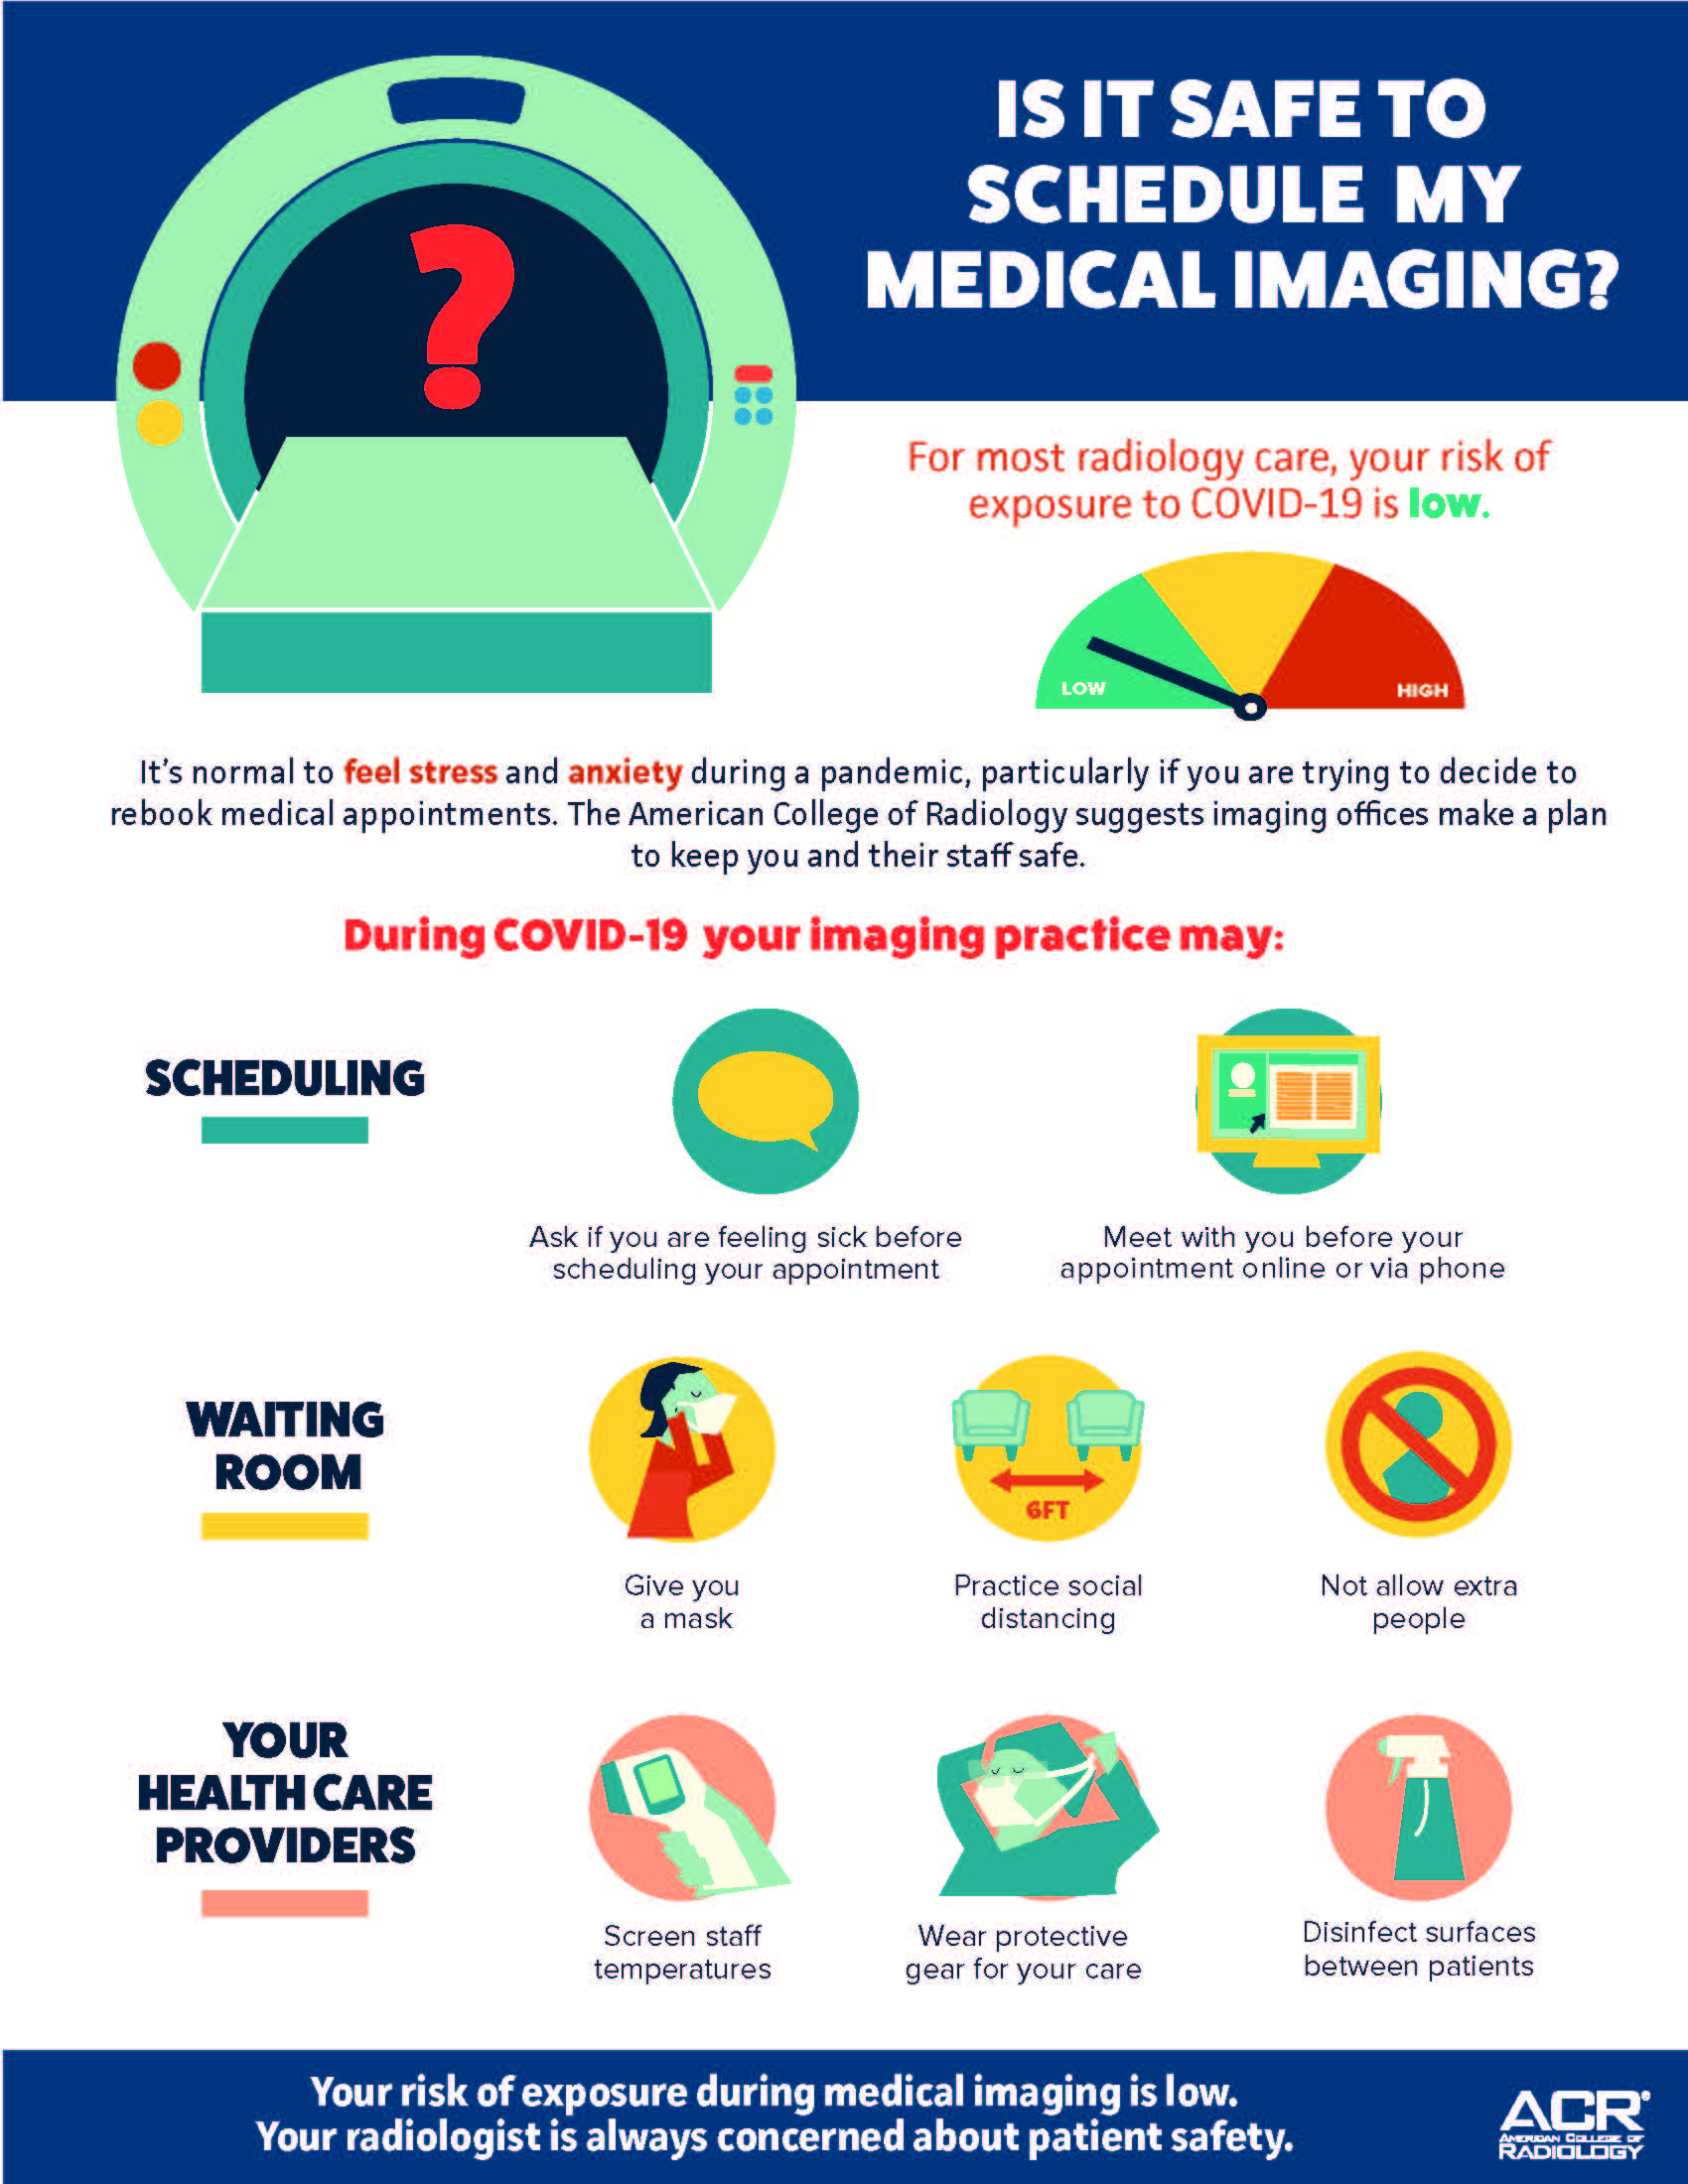 Infographic about medical imaging procedures during COVID-19